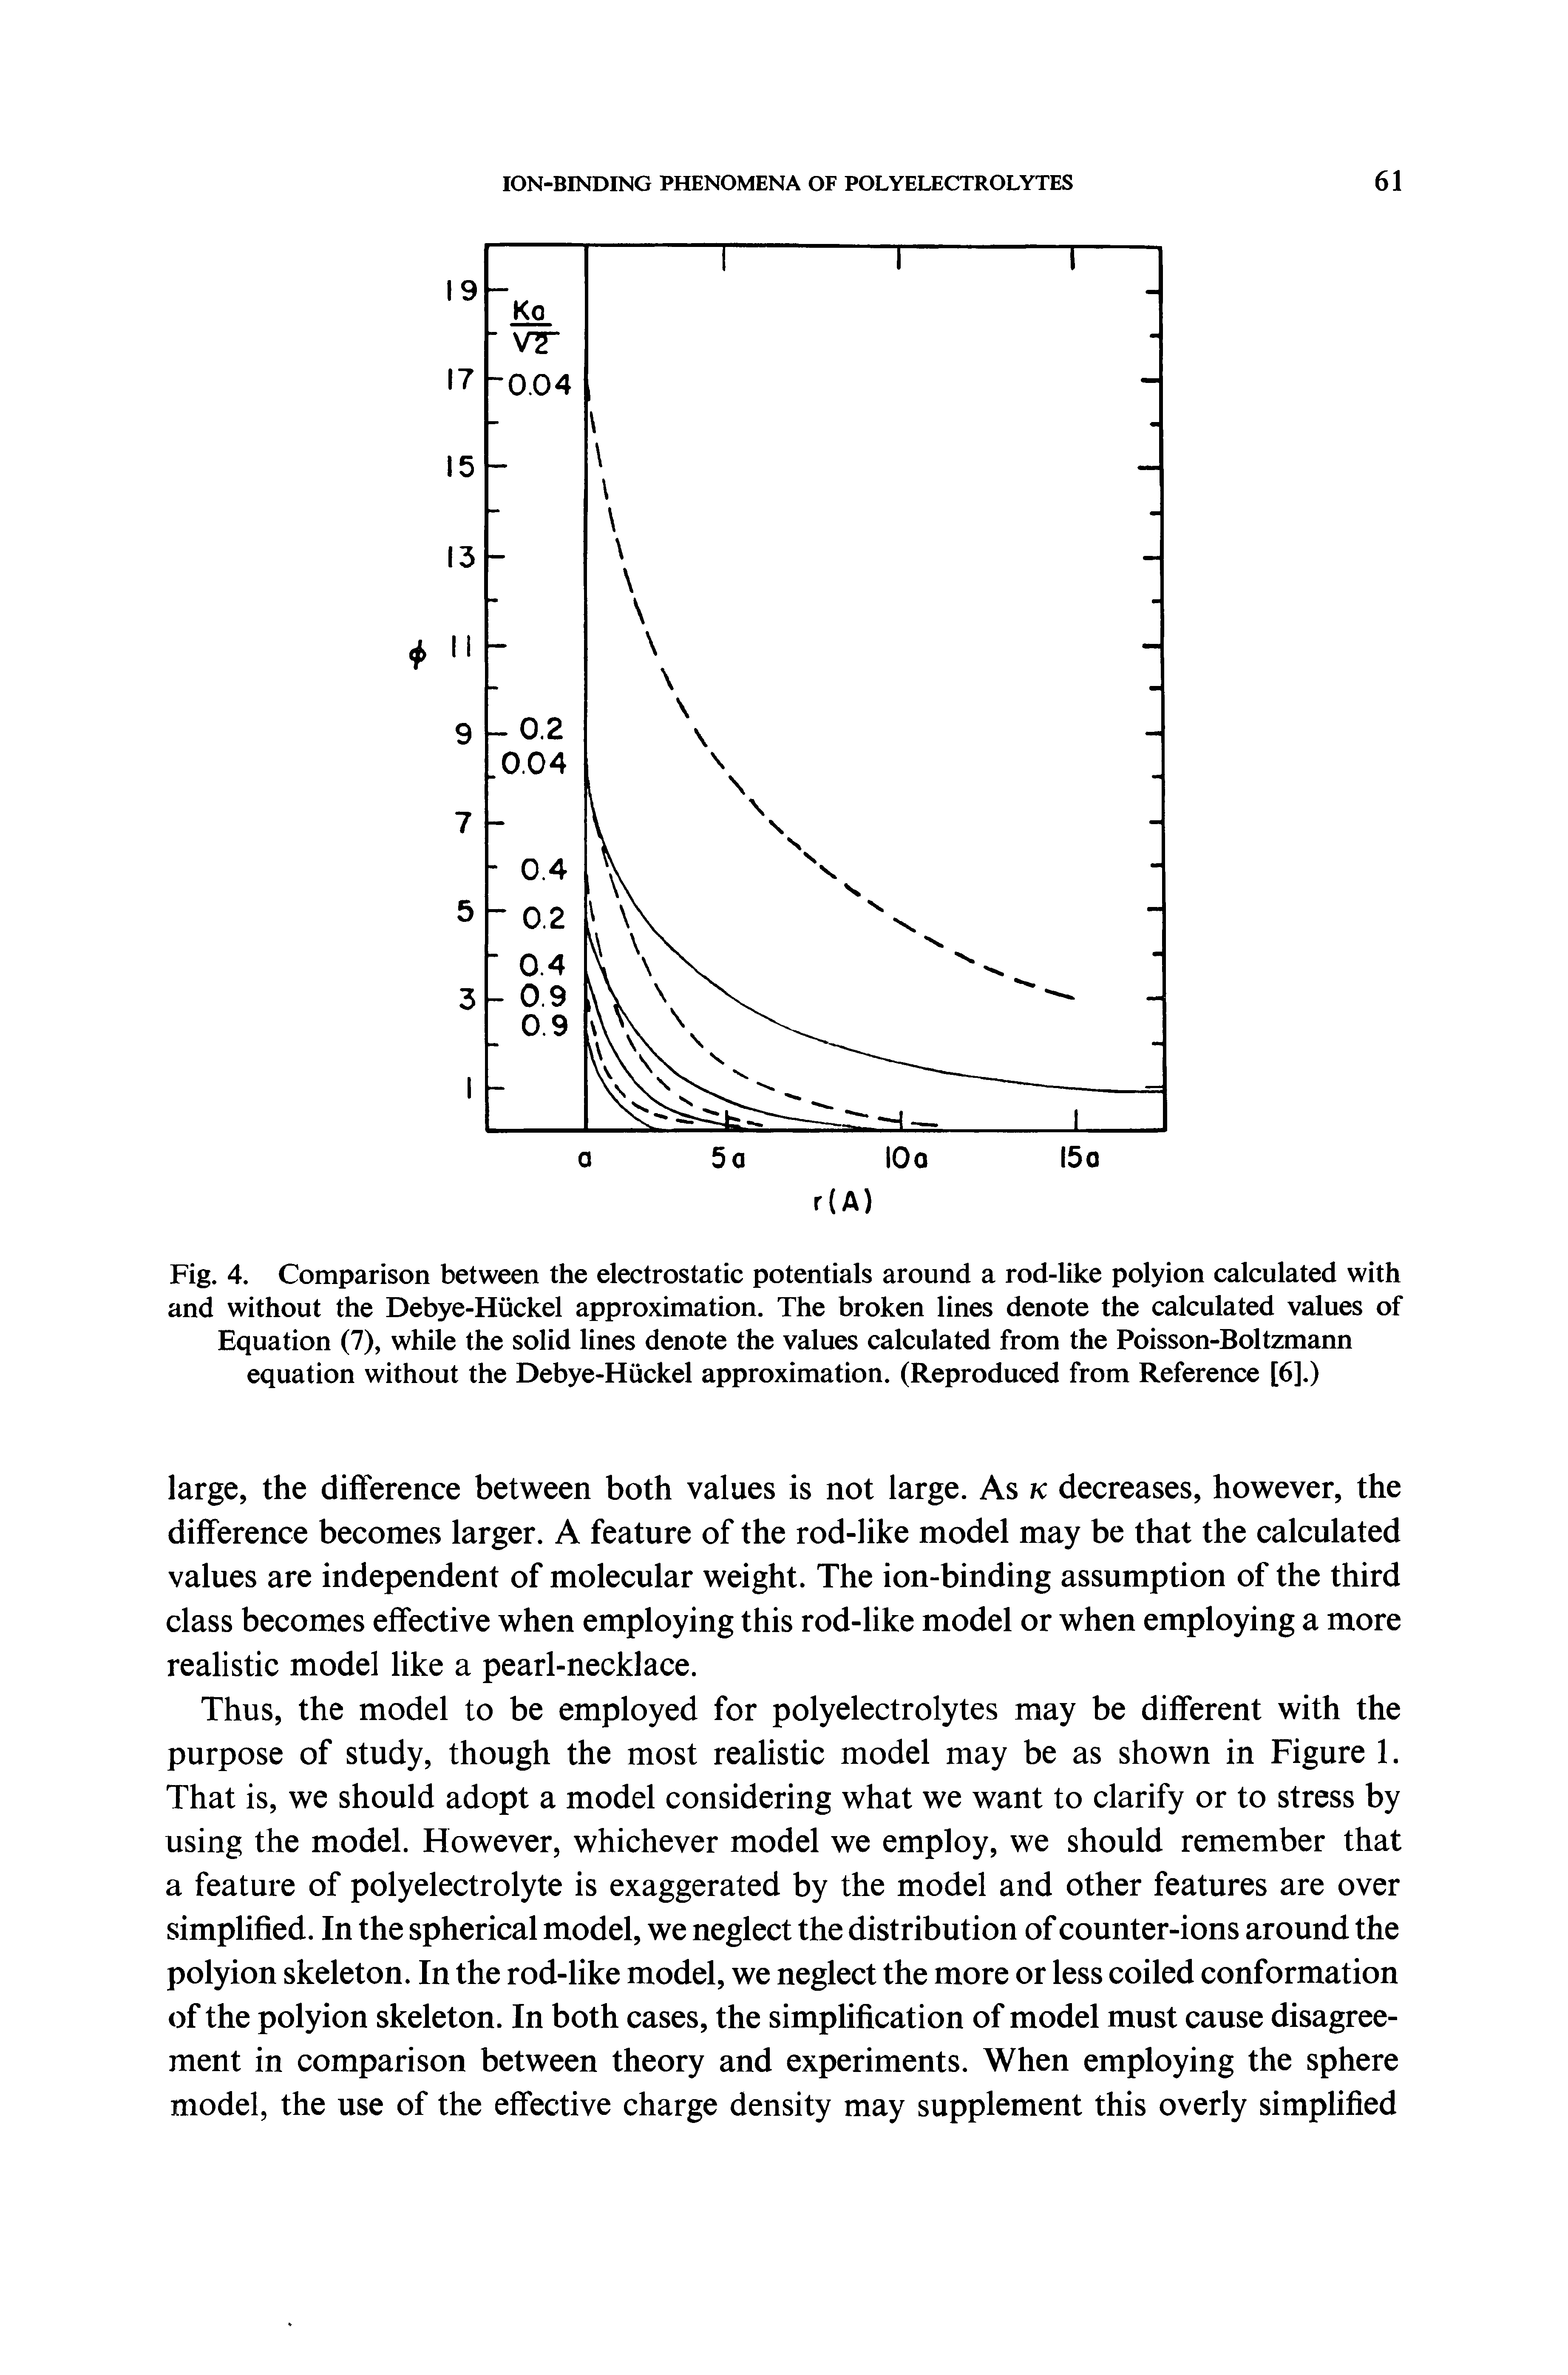 Fig. 4. Comparison between the electrostatic potentials around a rod-like polyion calculated with and without the Debye-Hiickel approximation. The broken lines denote the calculated values of Equation (7), while the solid lines denote the values calculated from the Poisson-Boltzmann equation without the Debye-Huckel approximation. (Reproduced from Reference [6].)...